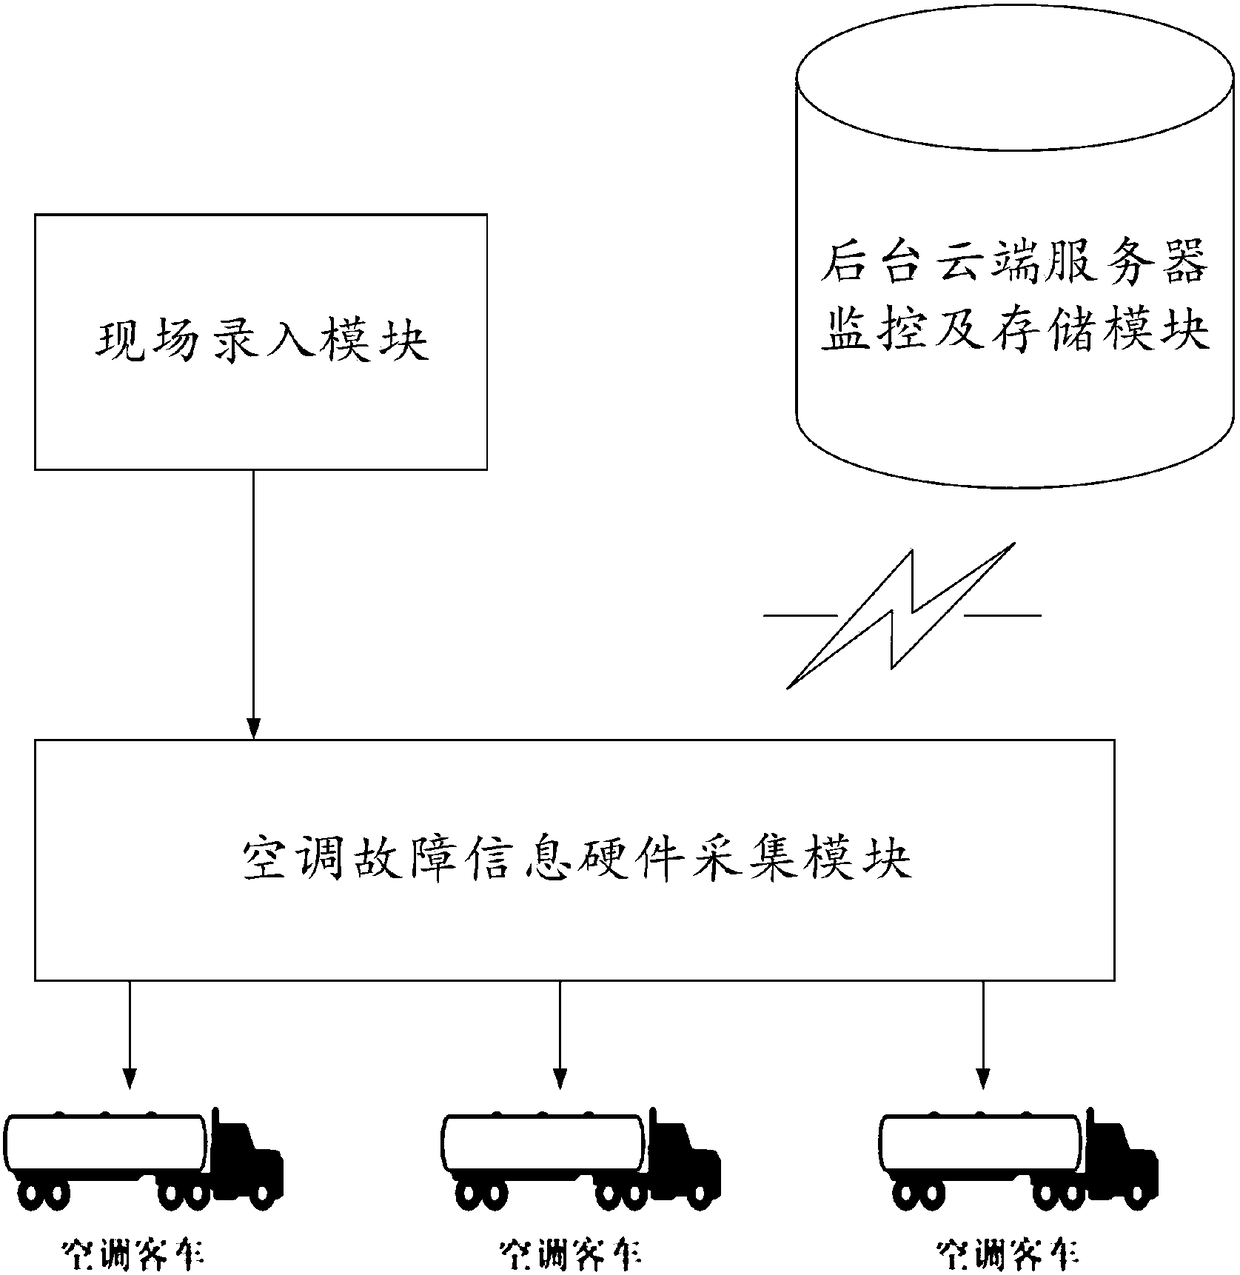 Air conditioning health monitoring system and monitoring method for electric bus